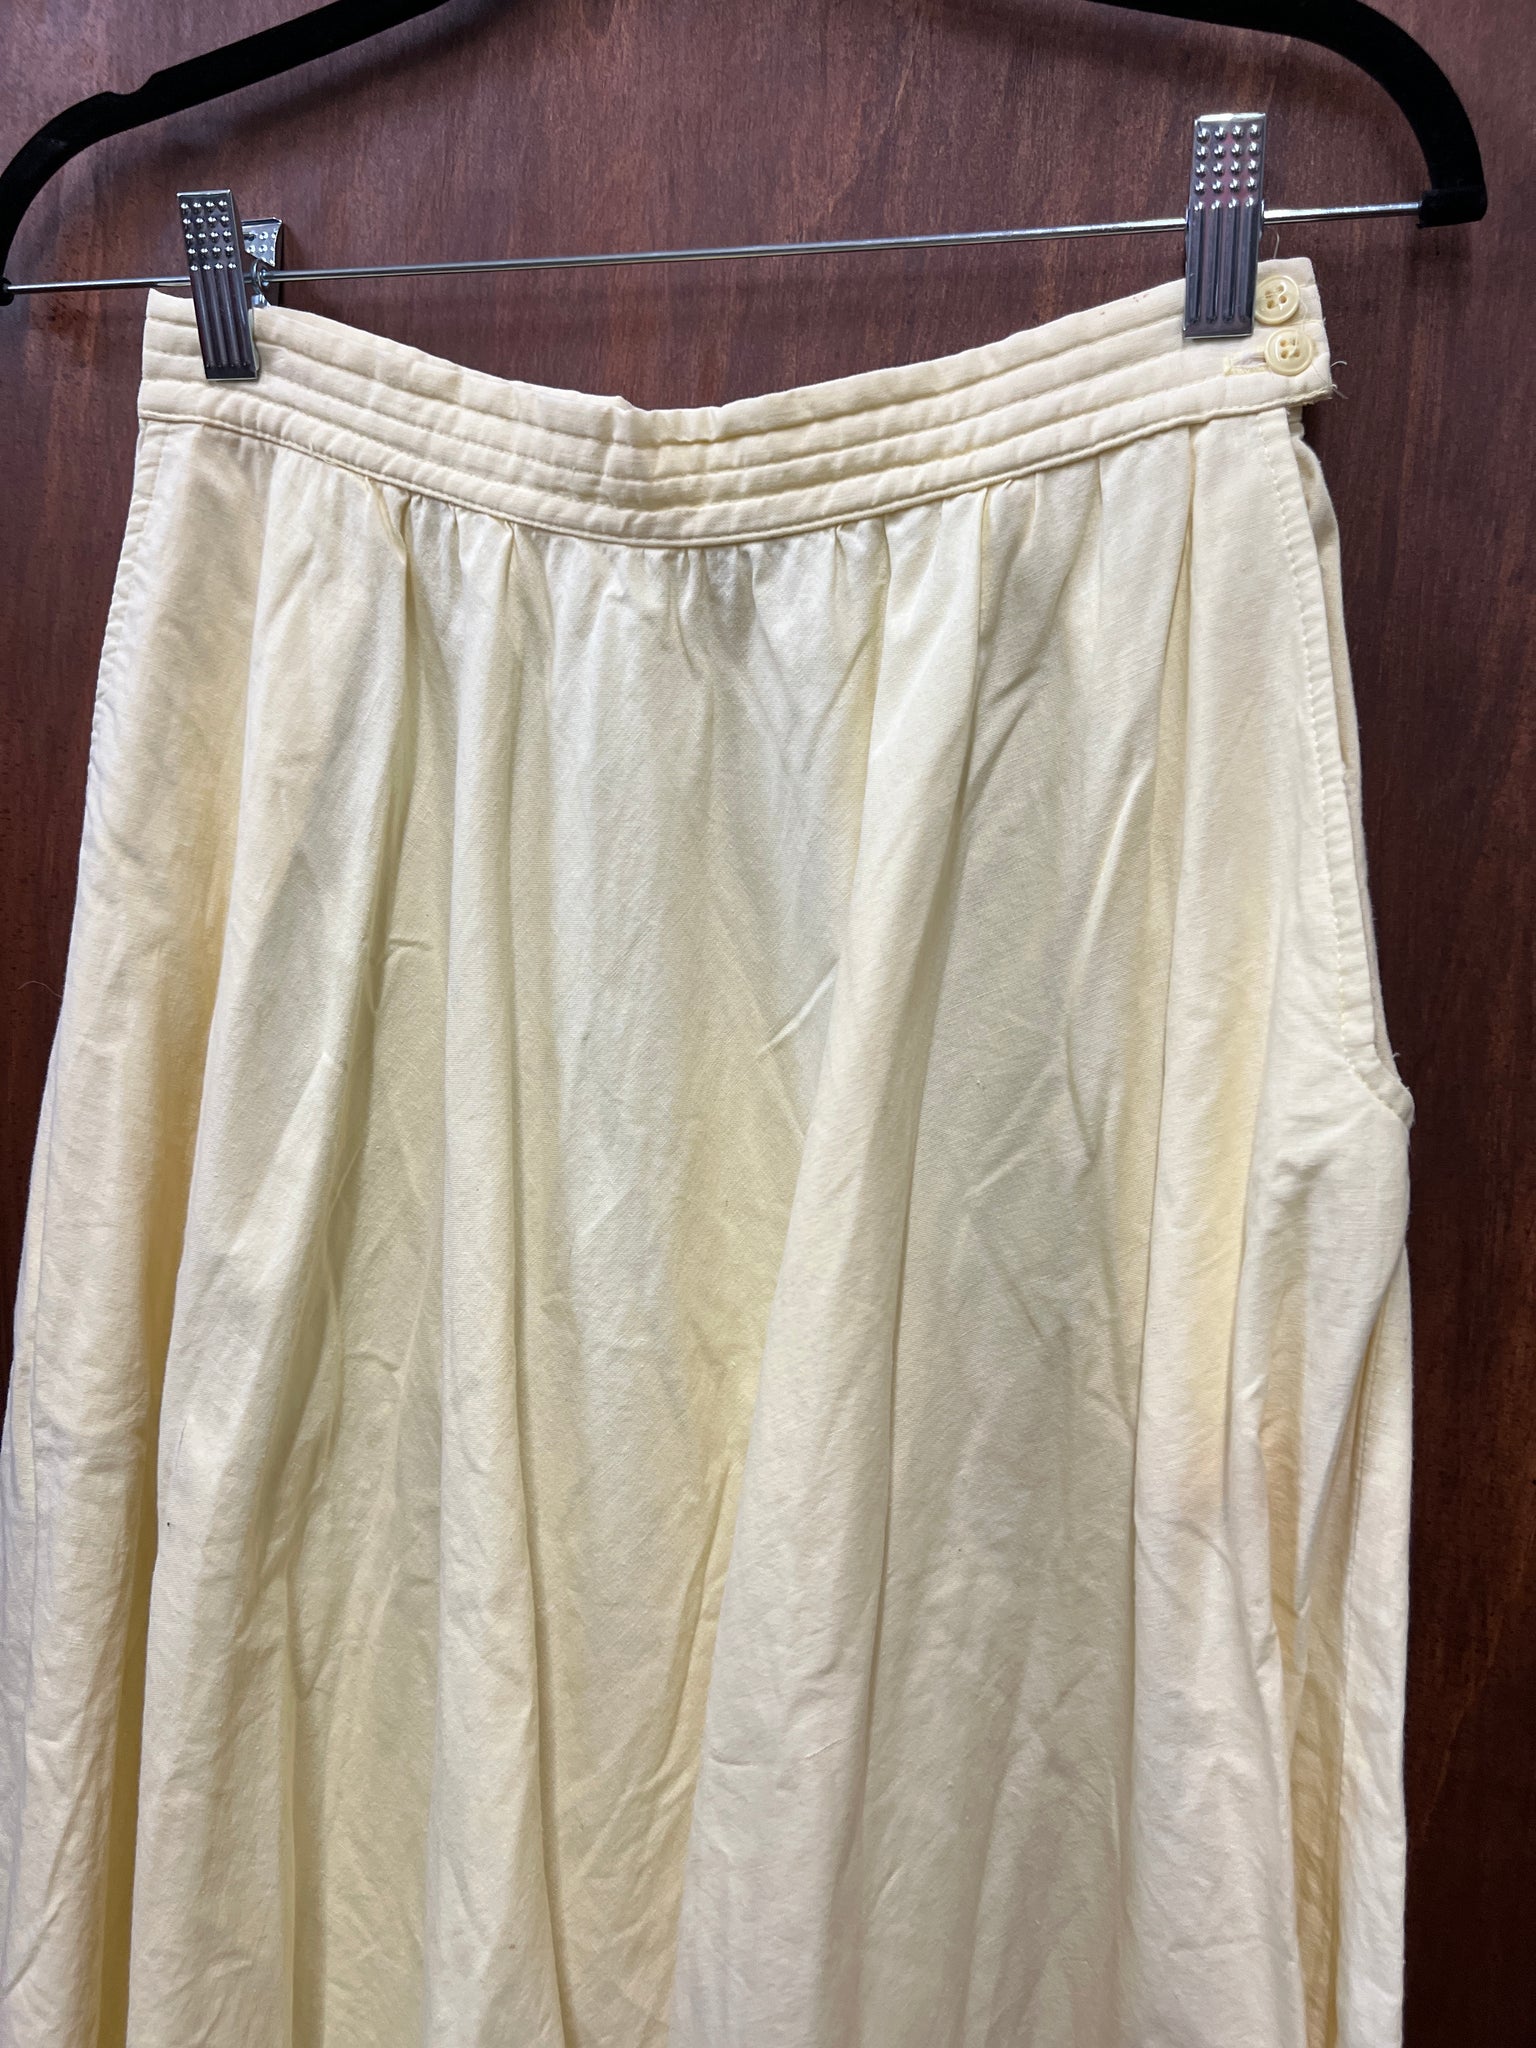 1980s SKIRT- Summit Yellow side button/pockets